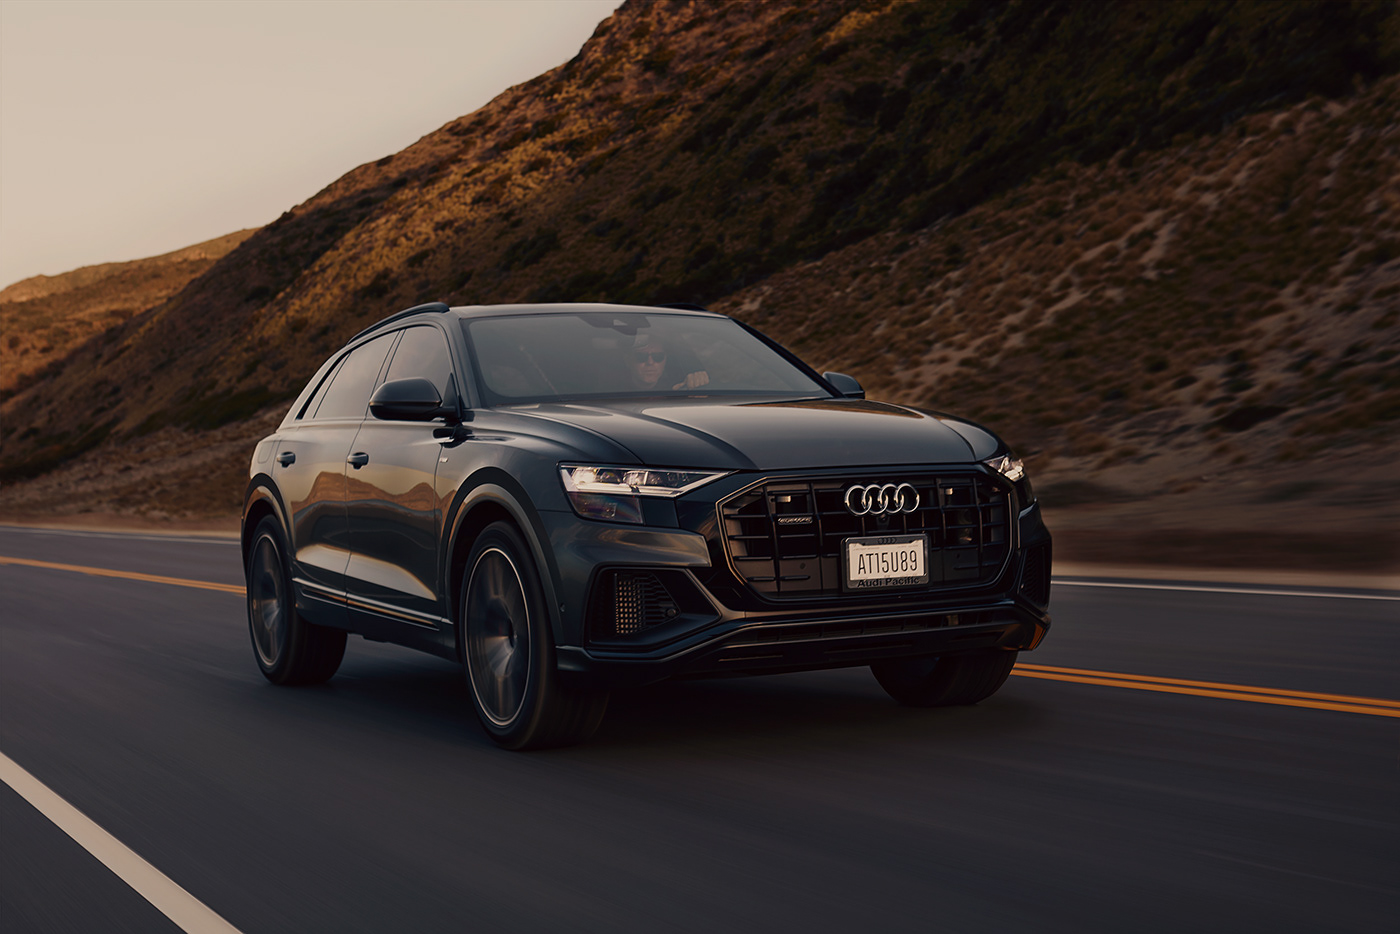 An early morning surf with an Audi Q8 at the beaches of Malibu and Point Mugu